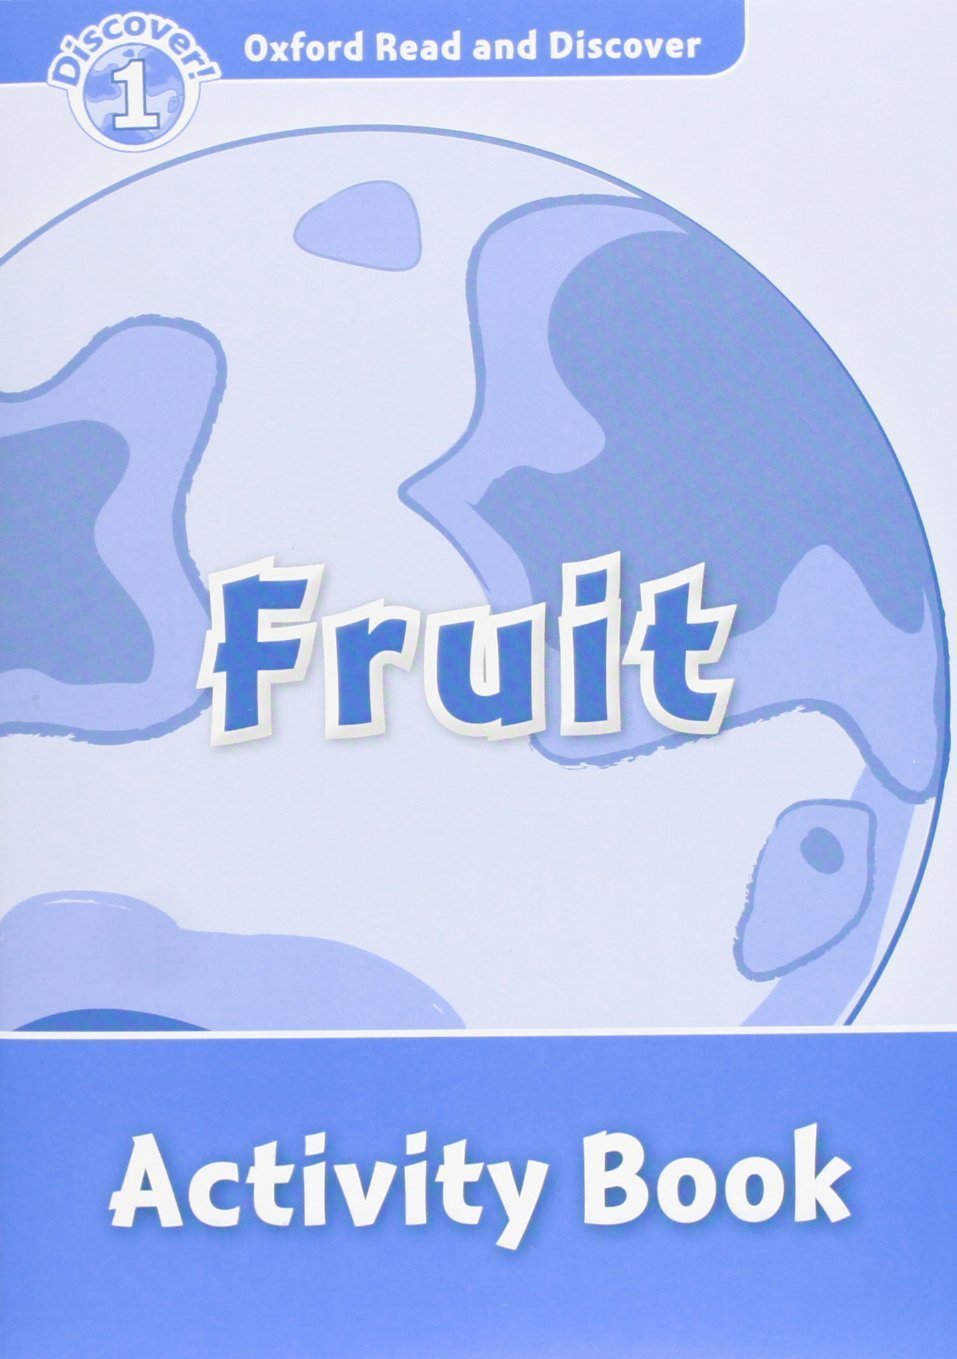 FRUIT (OXFORD READ AND DISCOVER, LEVEL 1) Activity Book